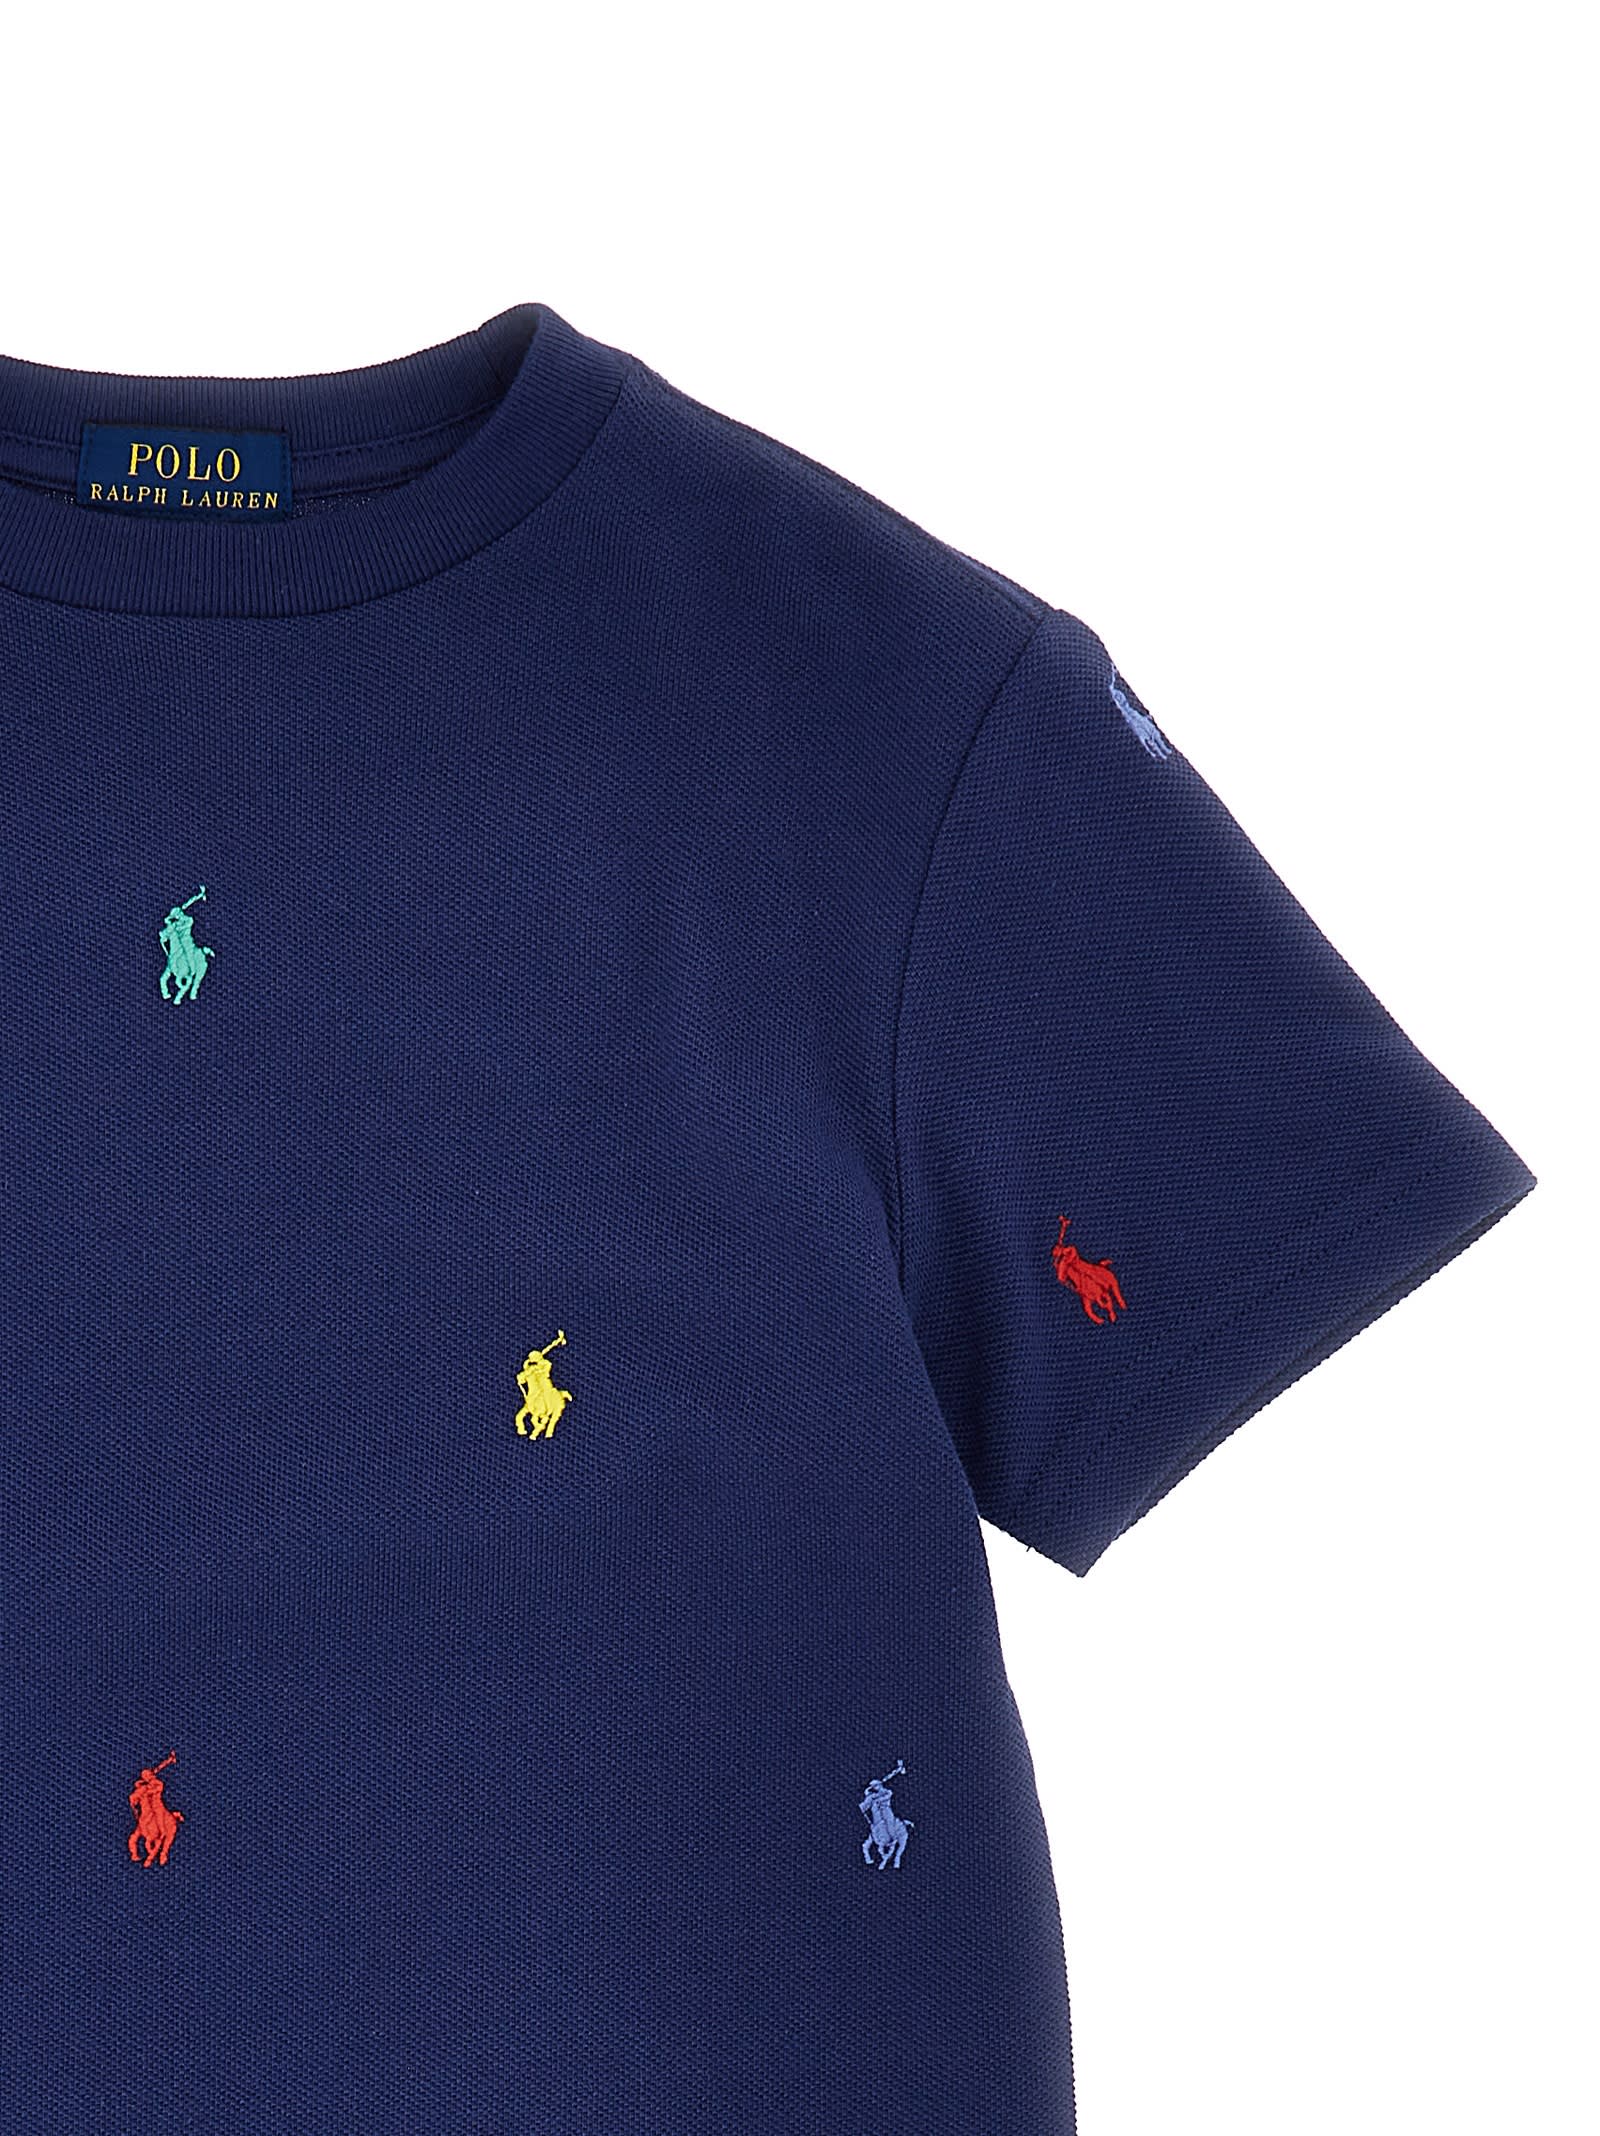 POLO RALPH LAUREN BOY T-SHIRT WITH LOGO EMBROIDERED Kid Blue